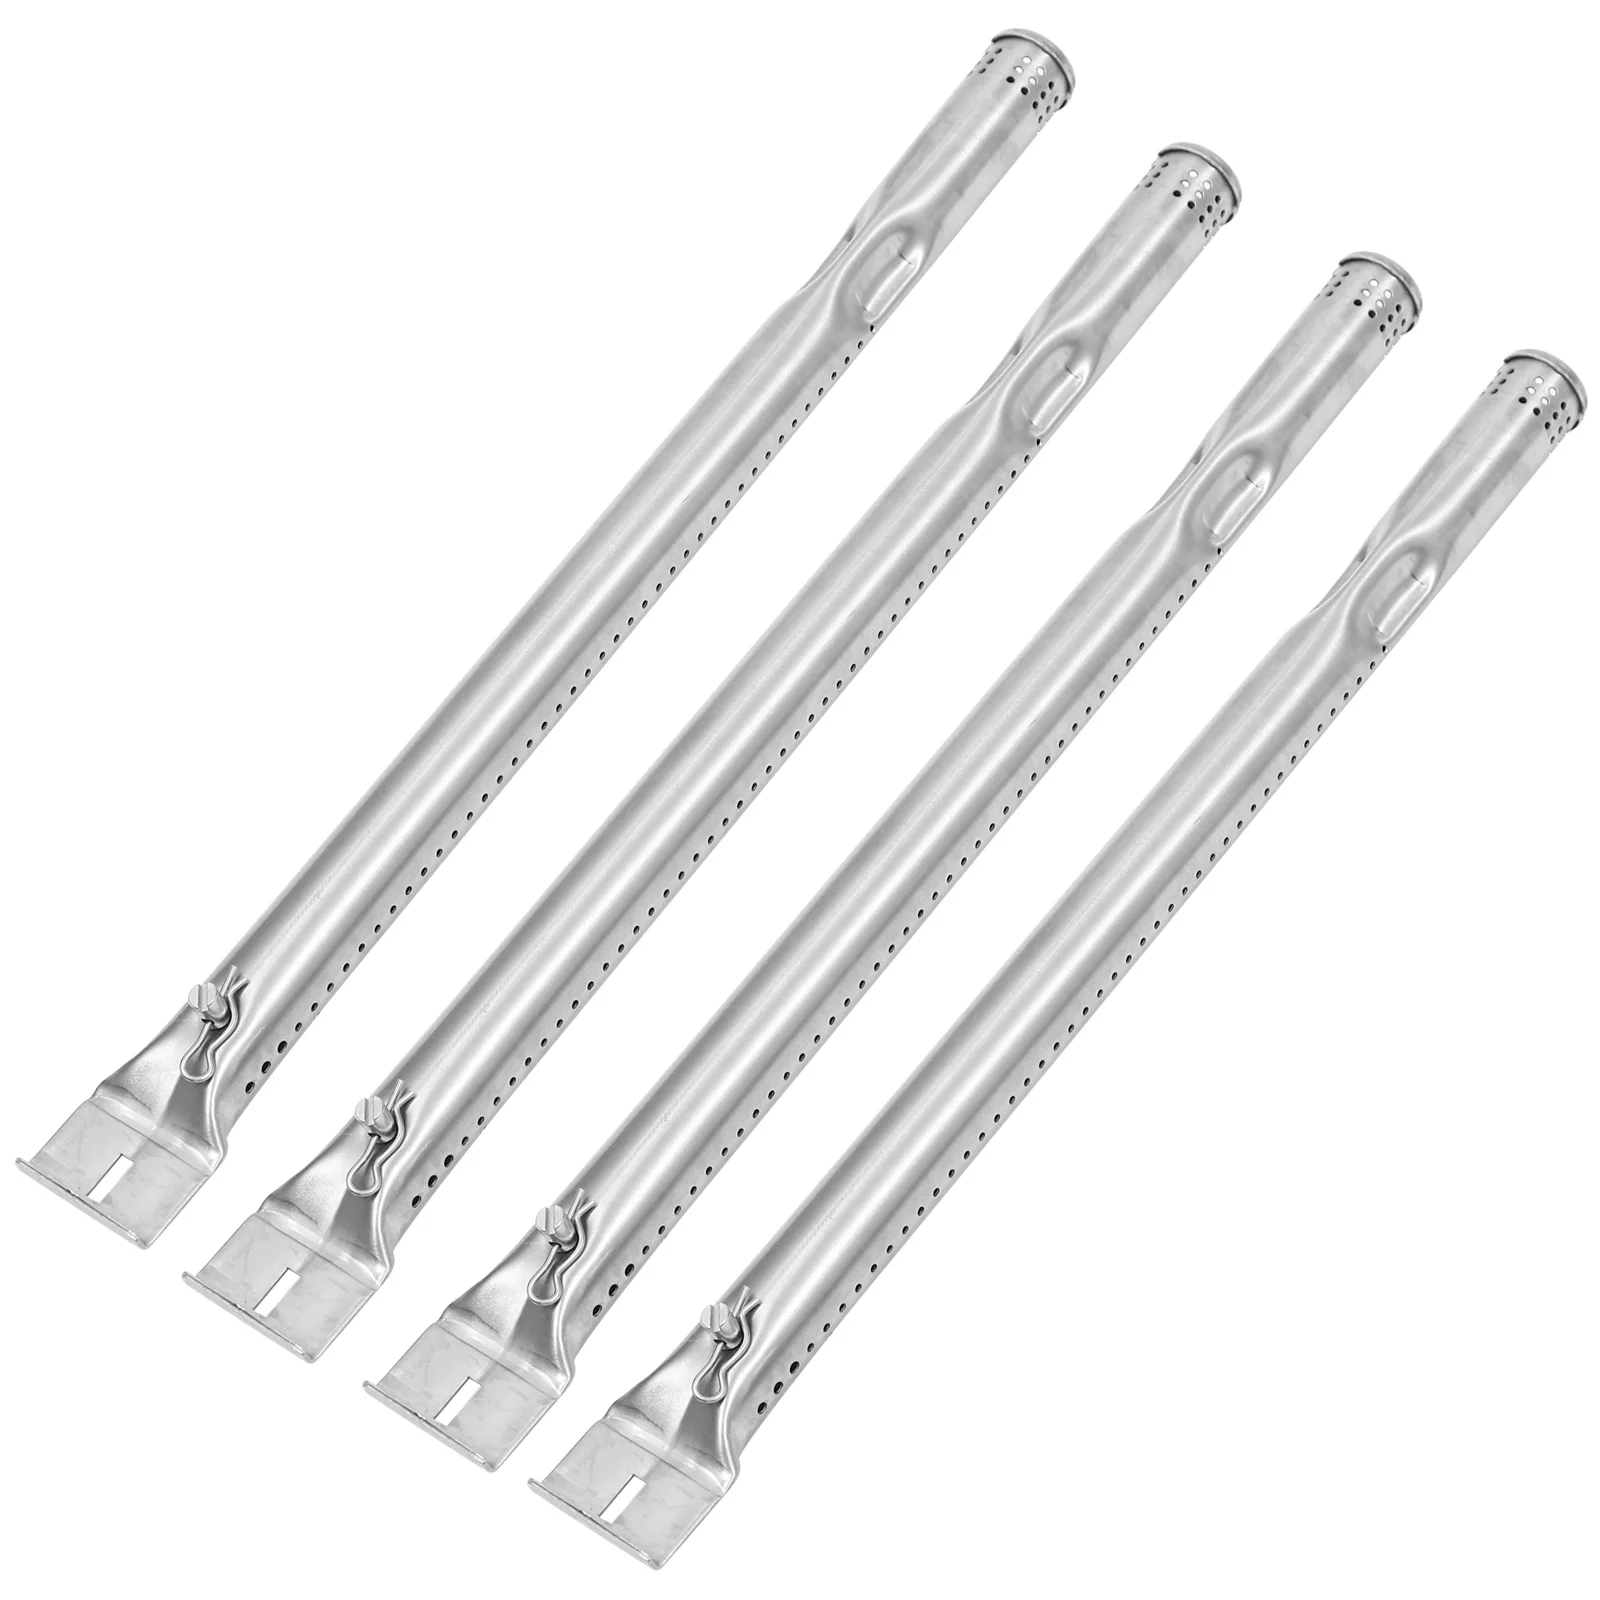 

Outdoor Grill Member Replacement Tube Stainless Steel Tube Home Gas Oven Burner Replacement Tubes BBQ Supplies Tool